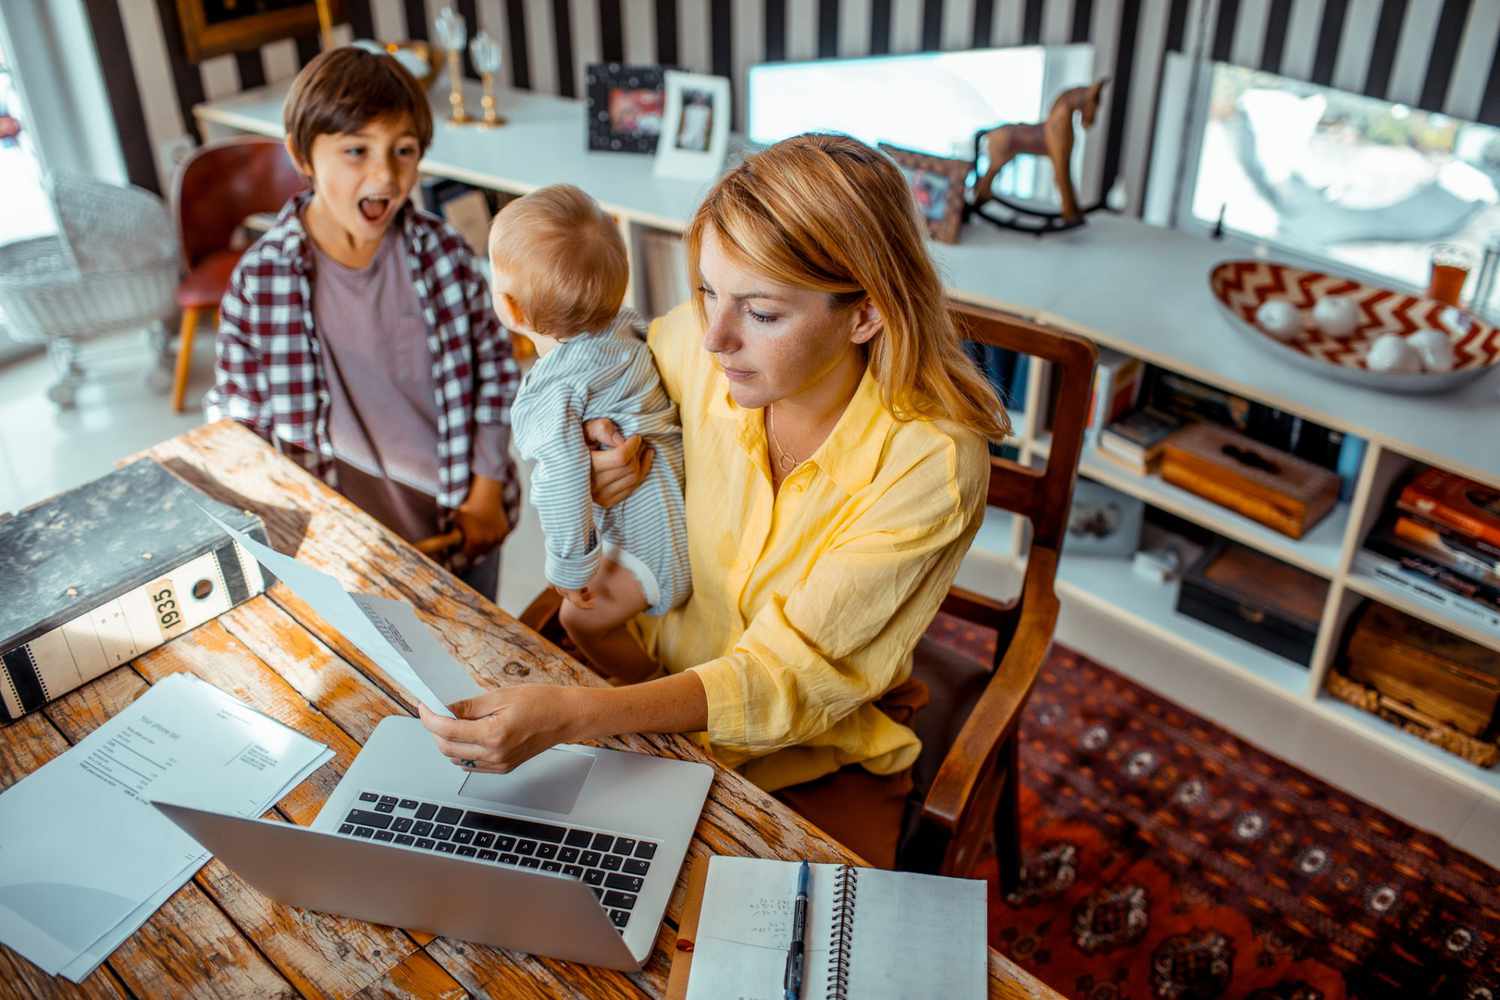 An image of a woman and her children at her desk.